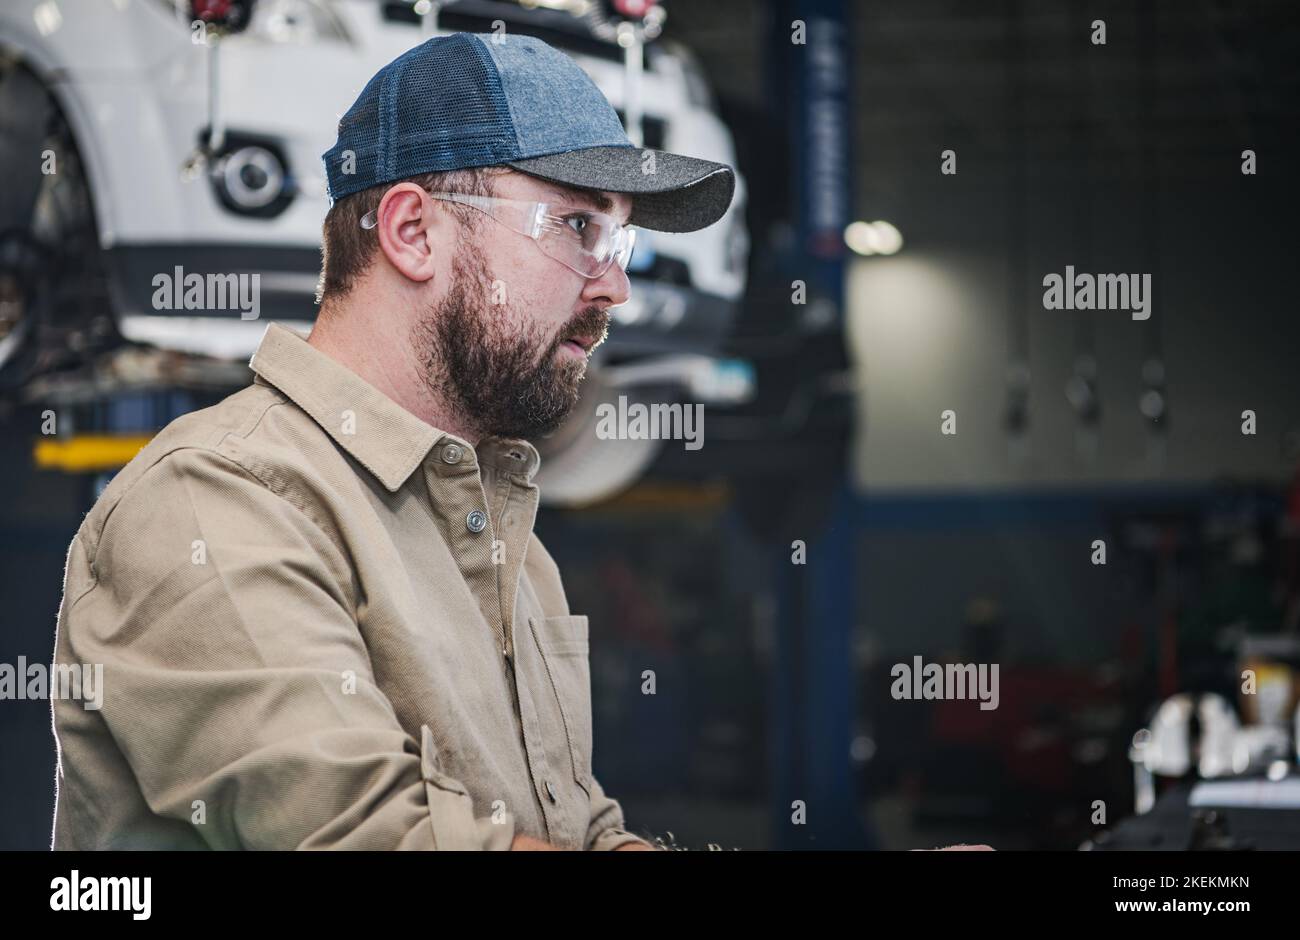 Professional Car Mechanic in His 30s Wearing Eyes Protection Glasses. Automotive Service Center Job. Stock Photo